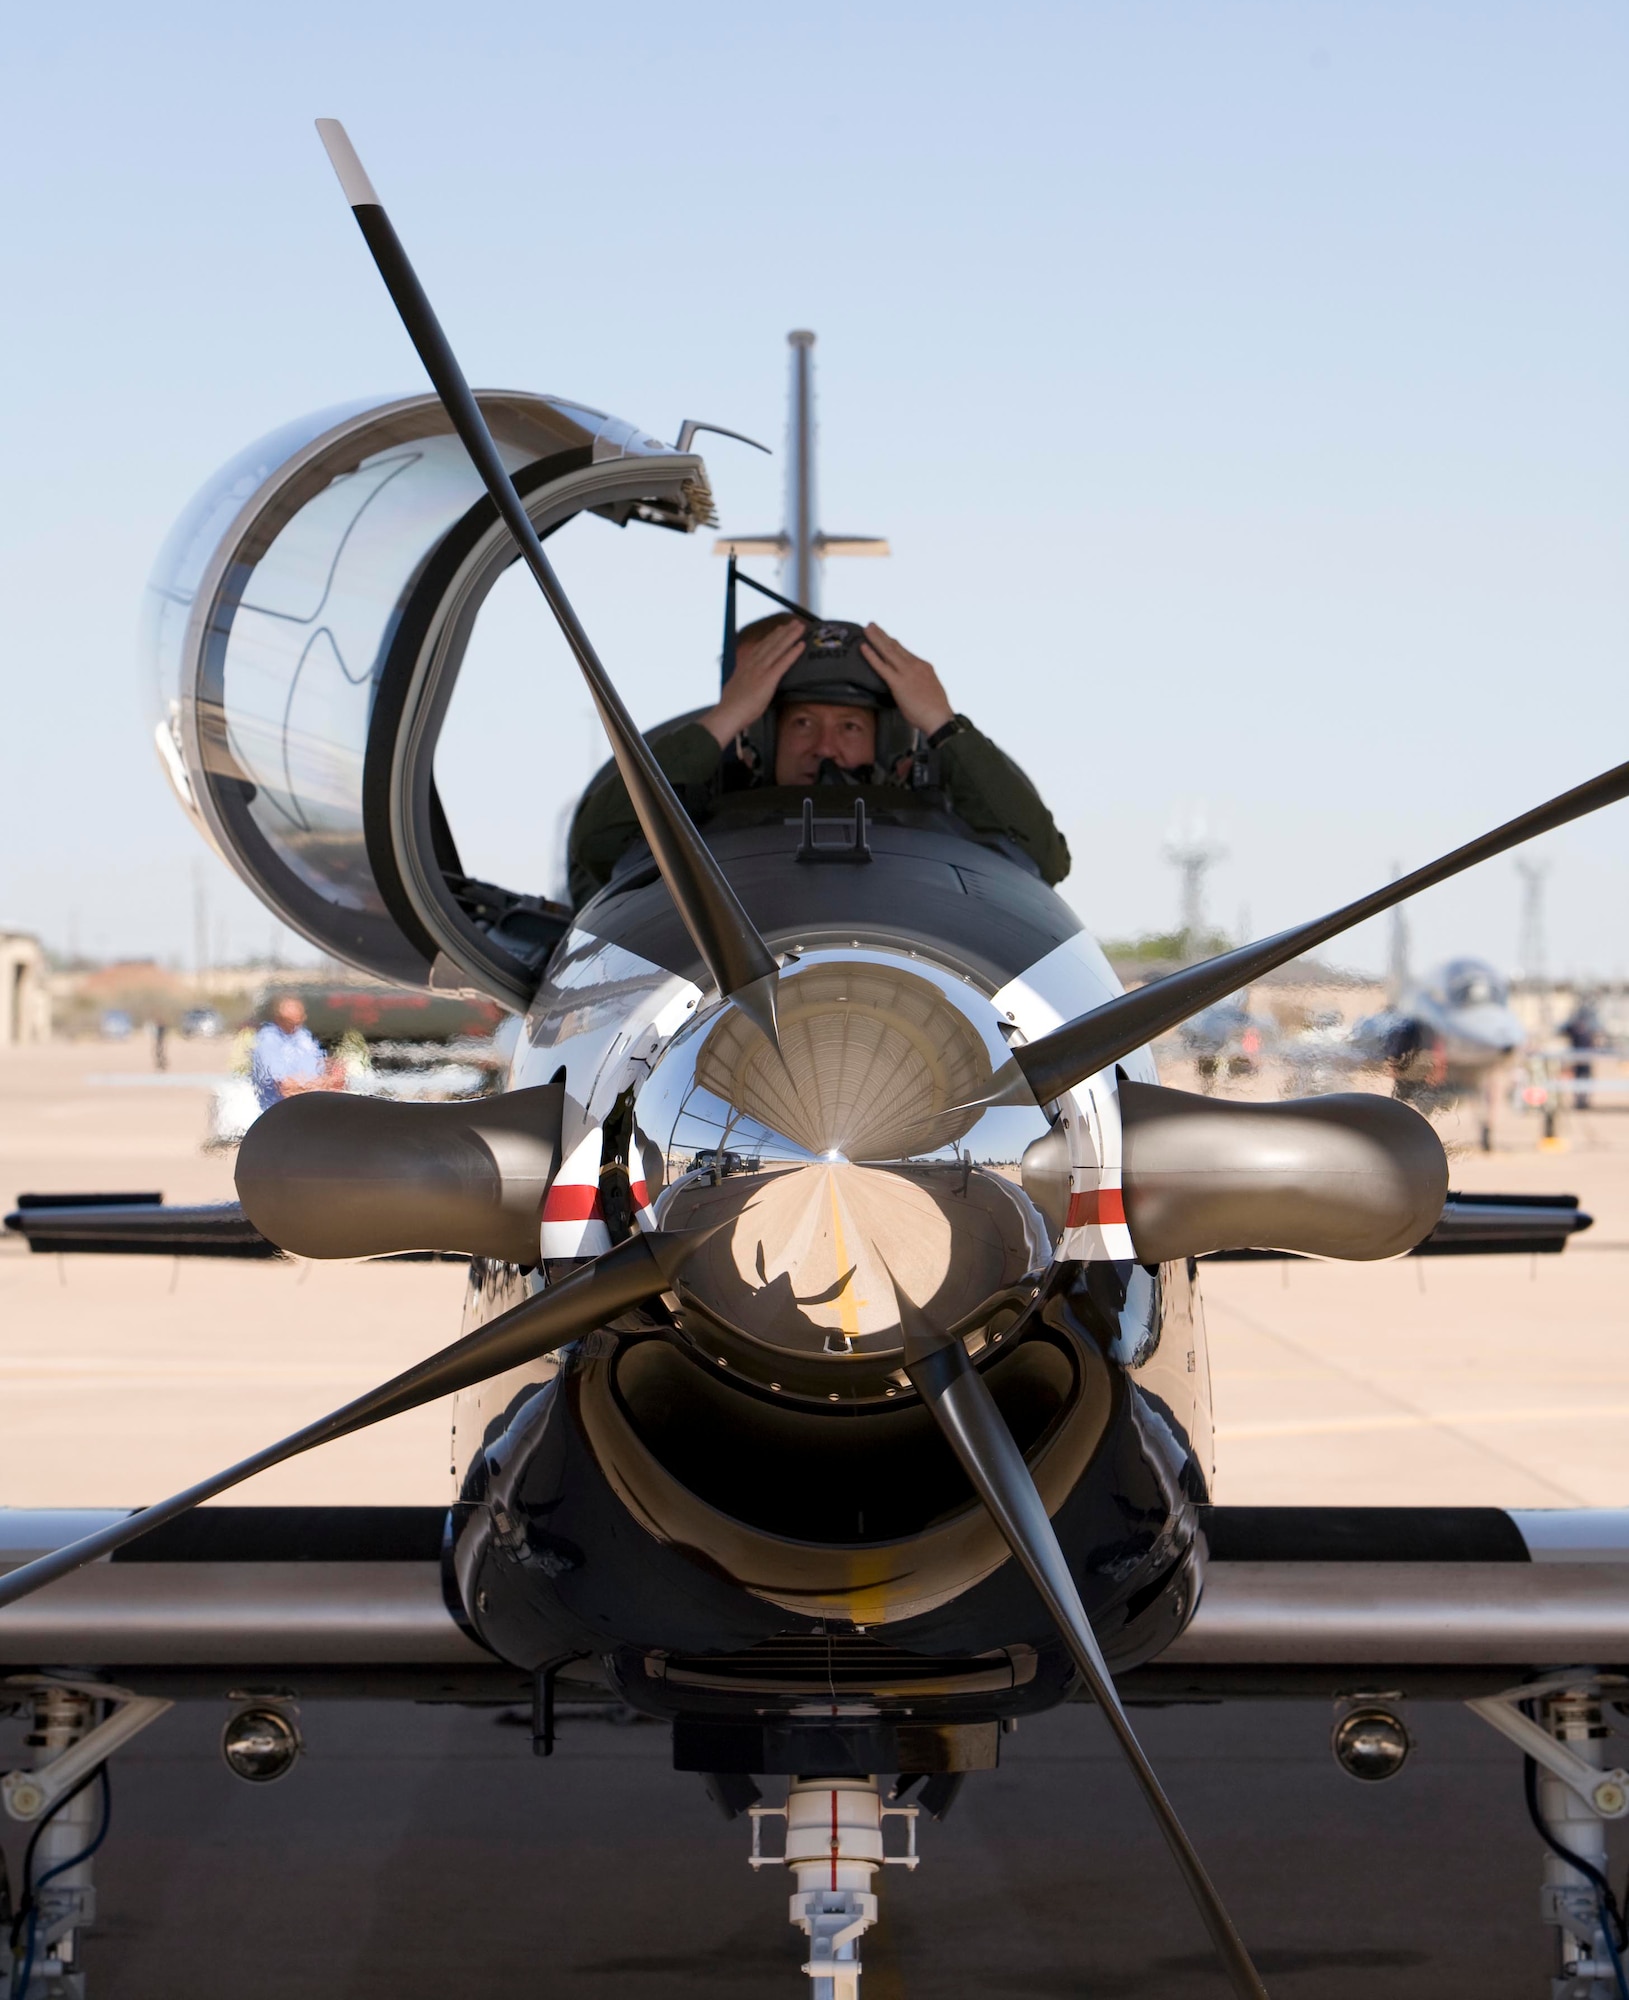 Maj. Gen. Gregory Feest, 19th Air Force commander, prepares to egress a brand new T-6 Texan II April 7 at the 80th Flying Training Wing. The general and Col. David Petersen, 80th FTW commander, picked up the new trainer that morning at Hawker-Beechcraft in Wichita, Kans. (U.S. Air Force photo/Lt. Col. Ternell Washington)